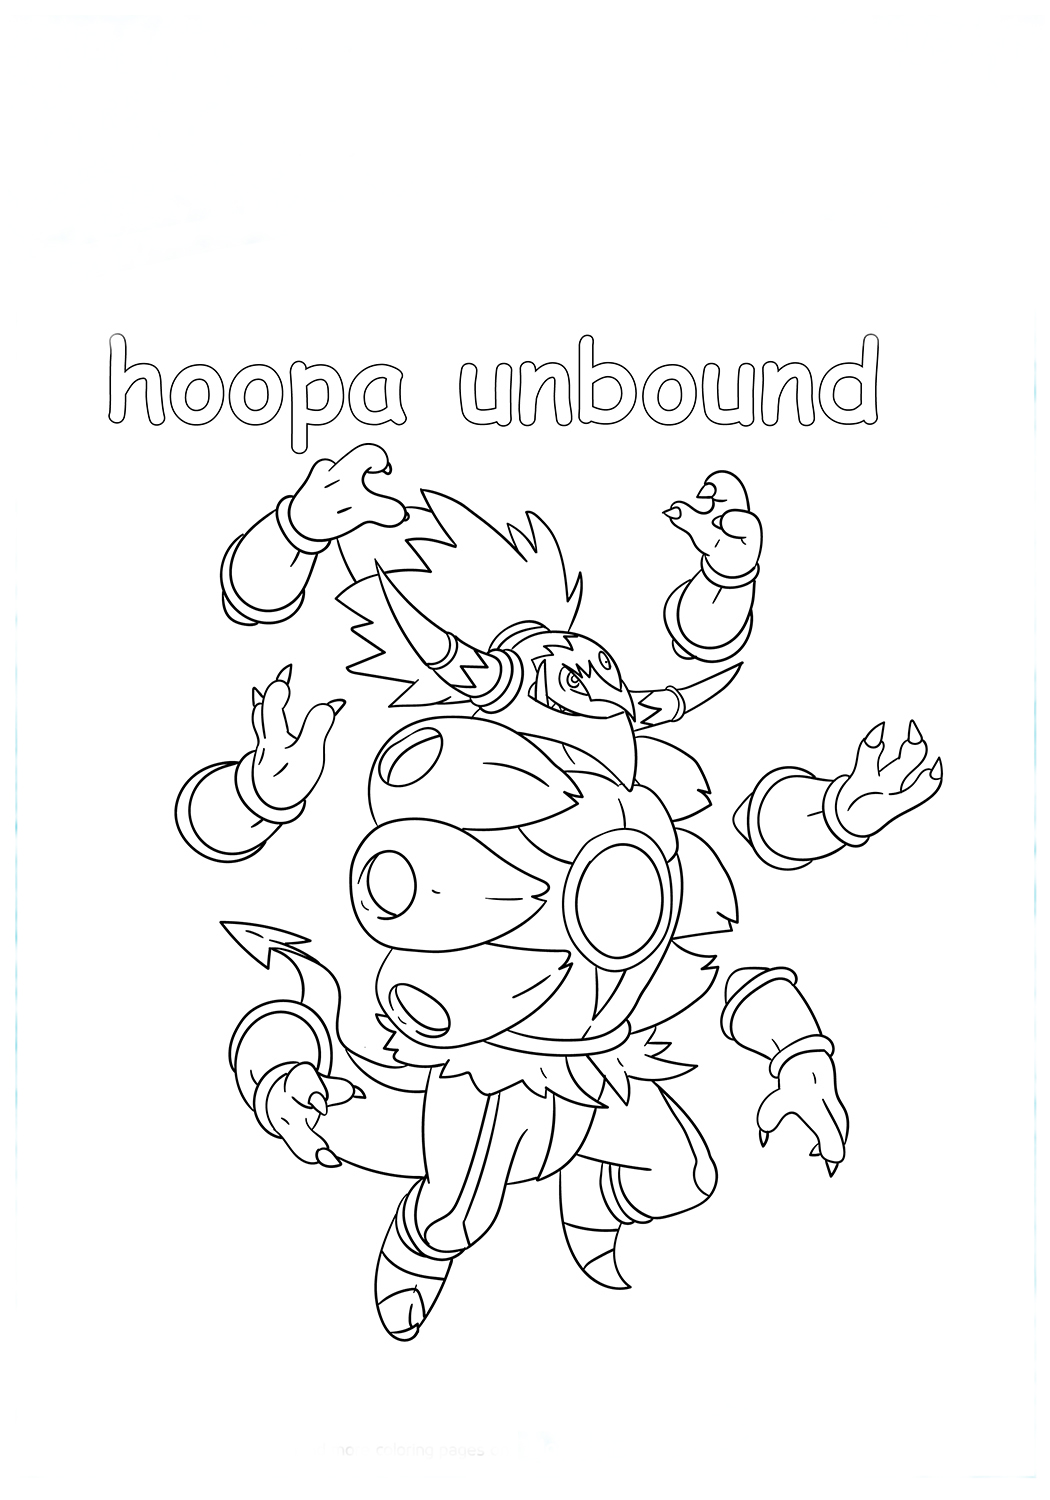 Hoopa Unbound Coloring Page - Free Printable Coloring Pages for Kids